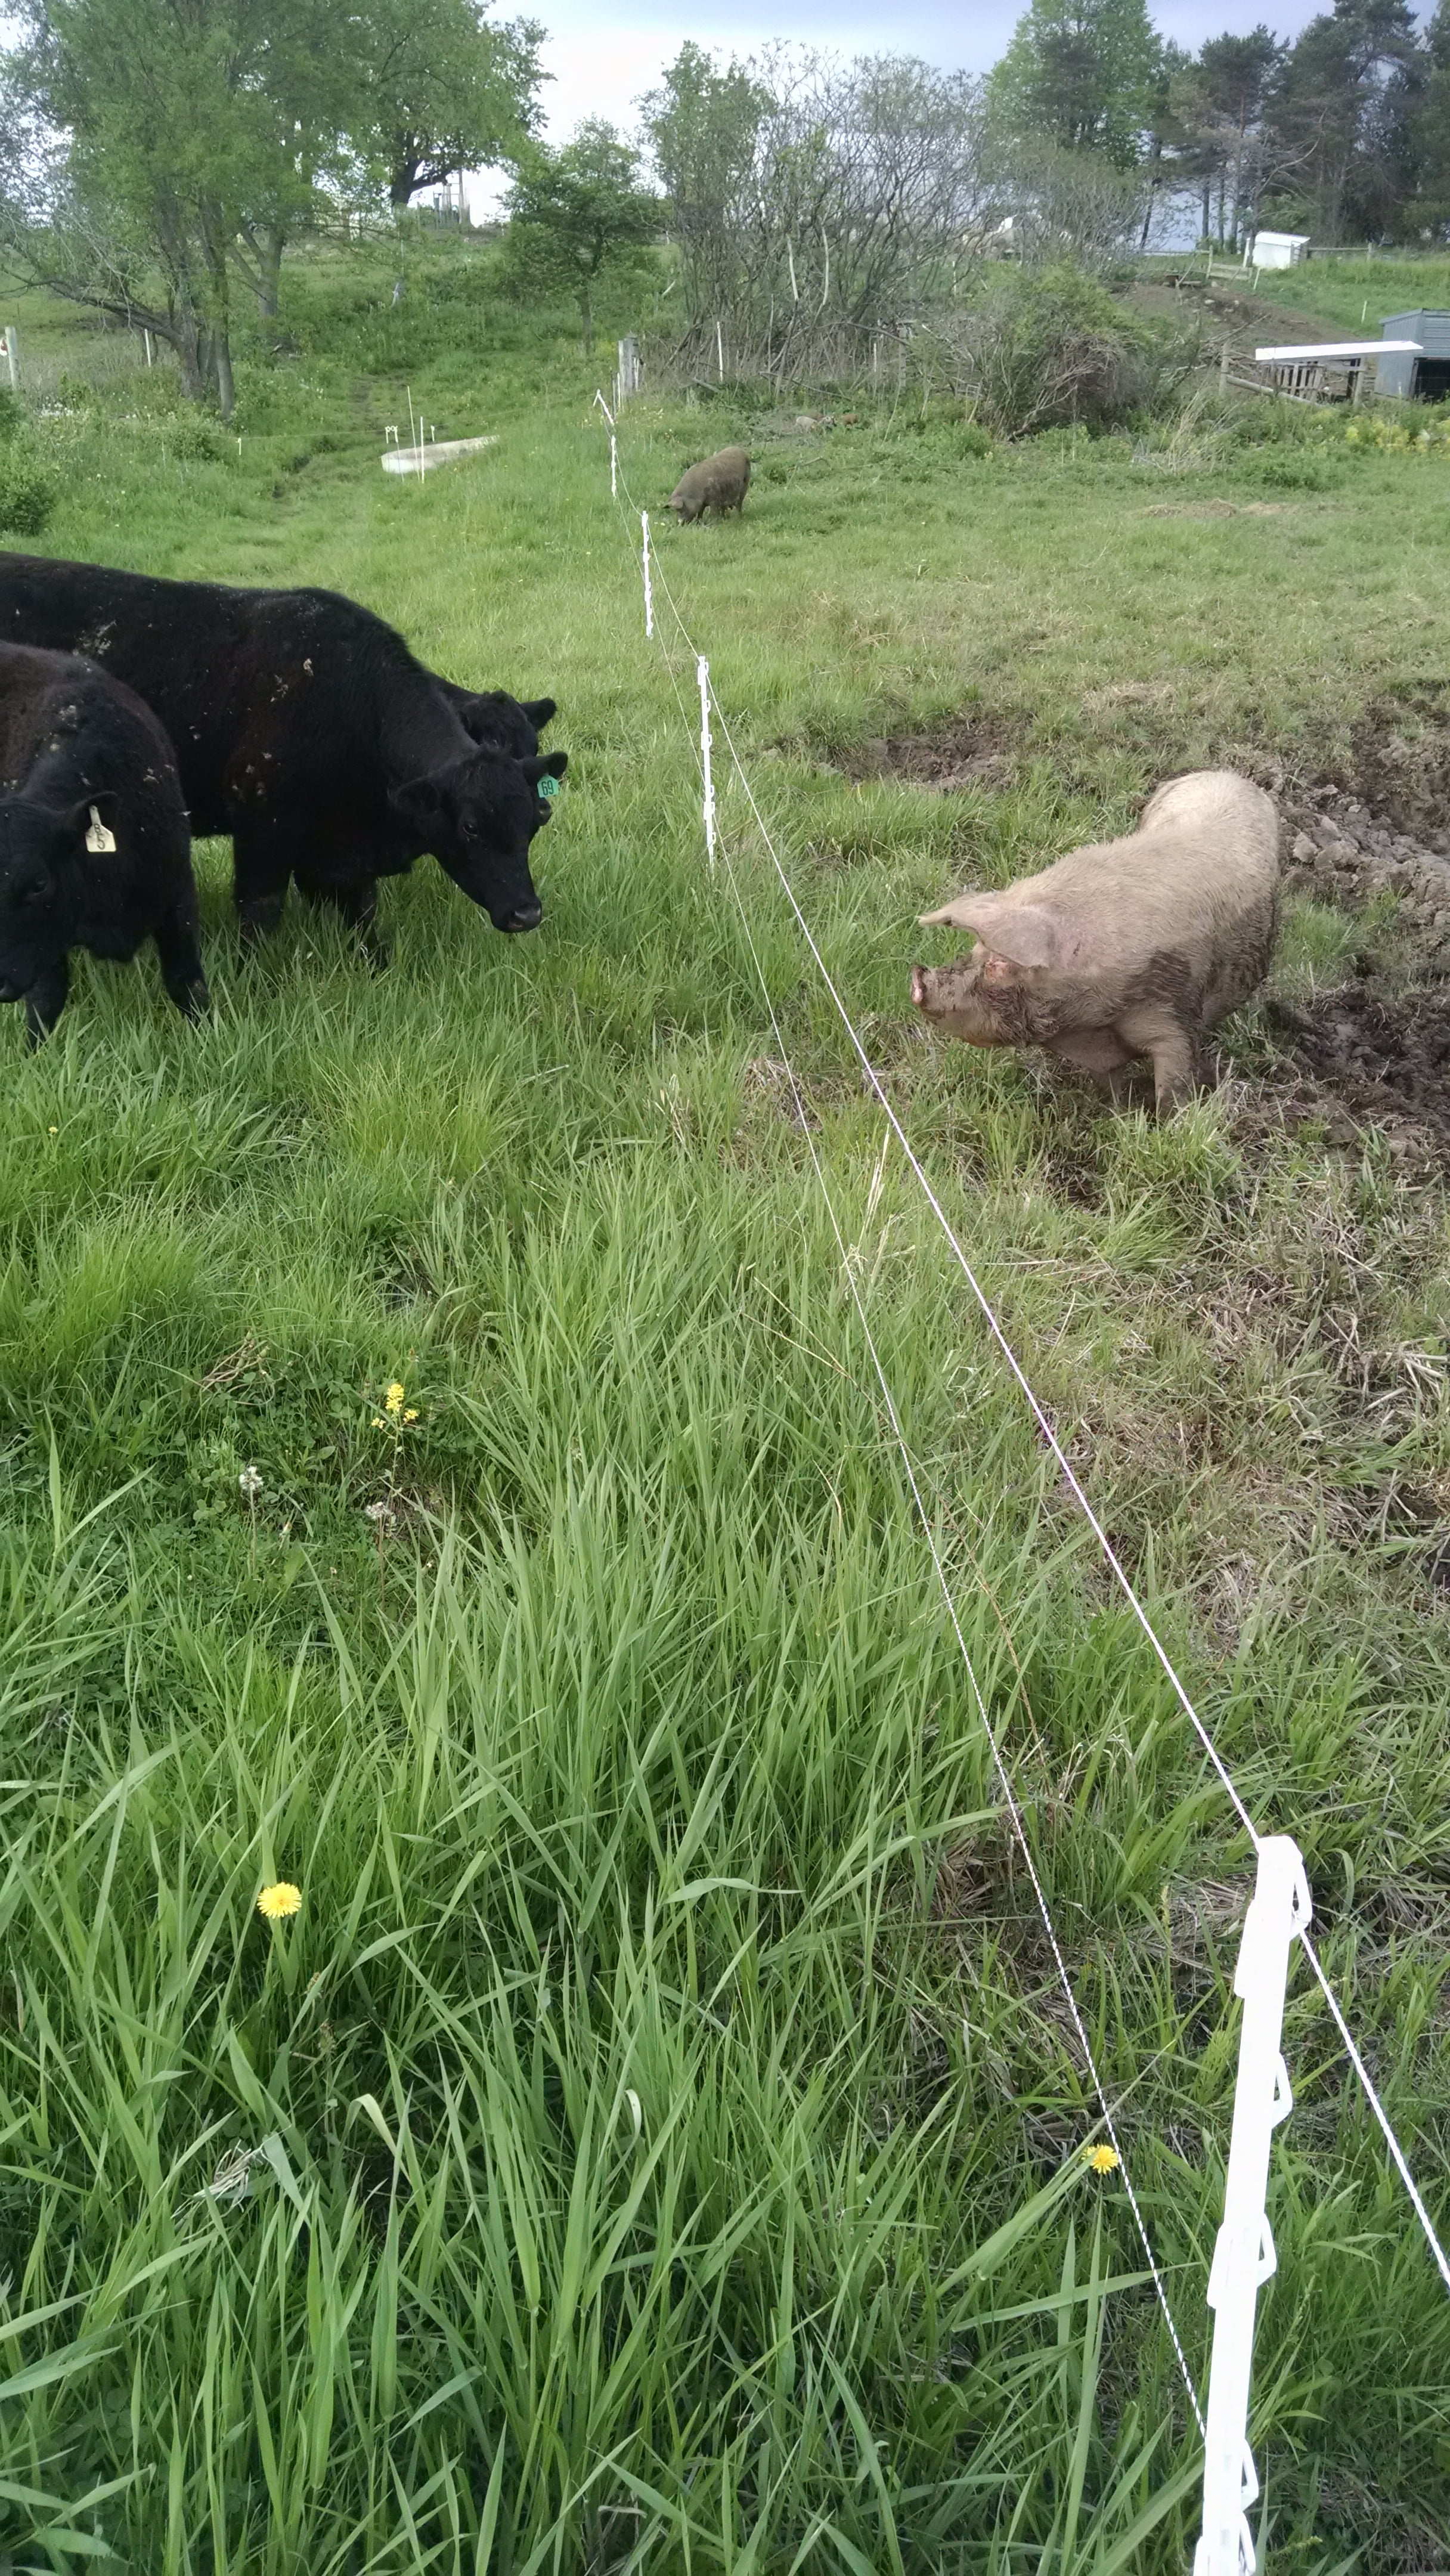 The cattle are baffled by the pigs.  The pigs are eager to explain things, but the cattle really don't want to listen.